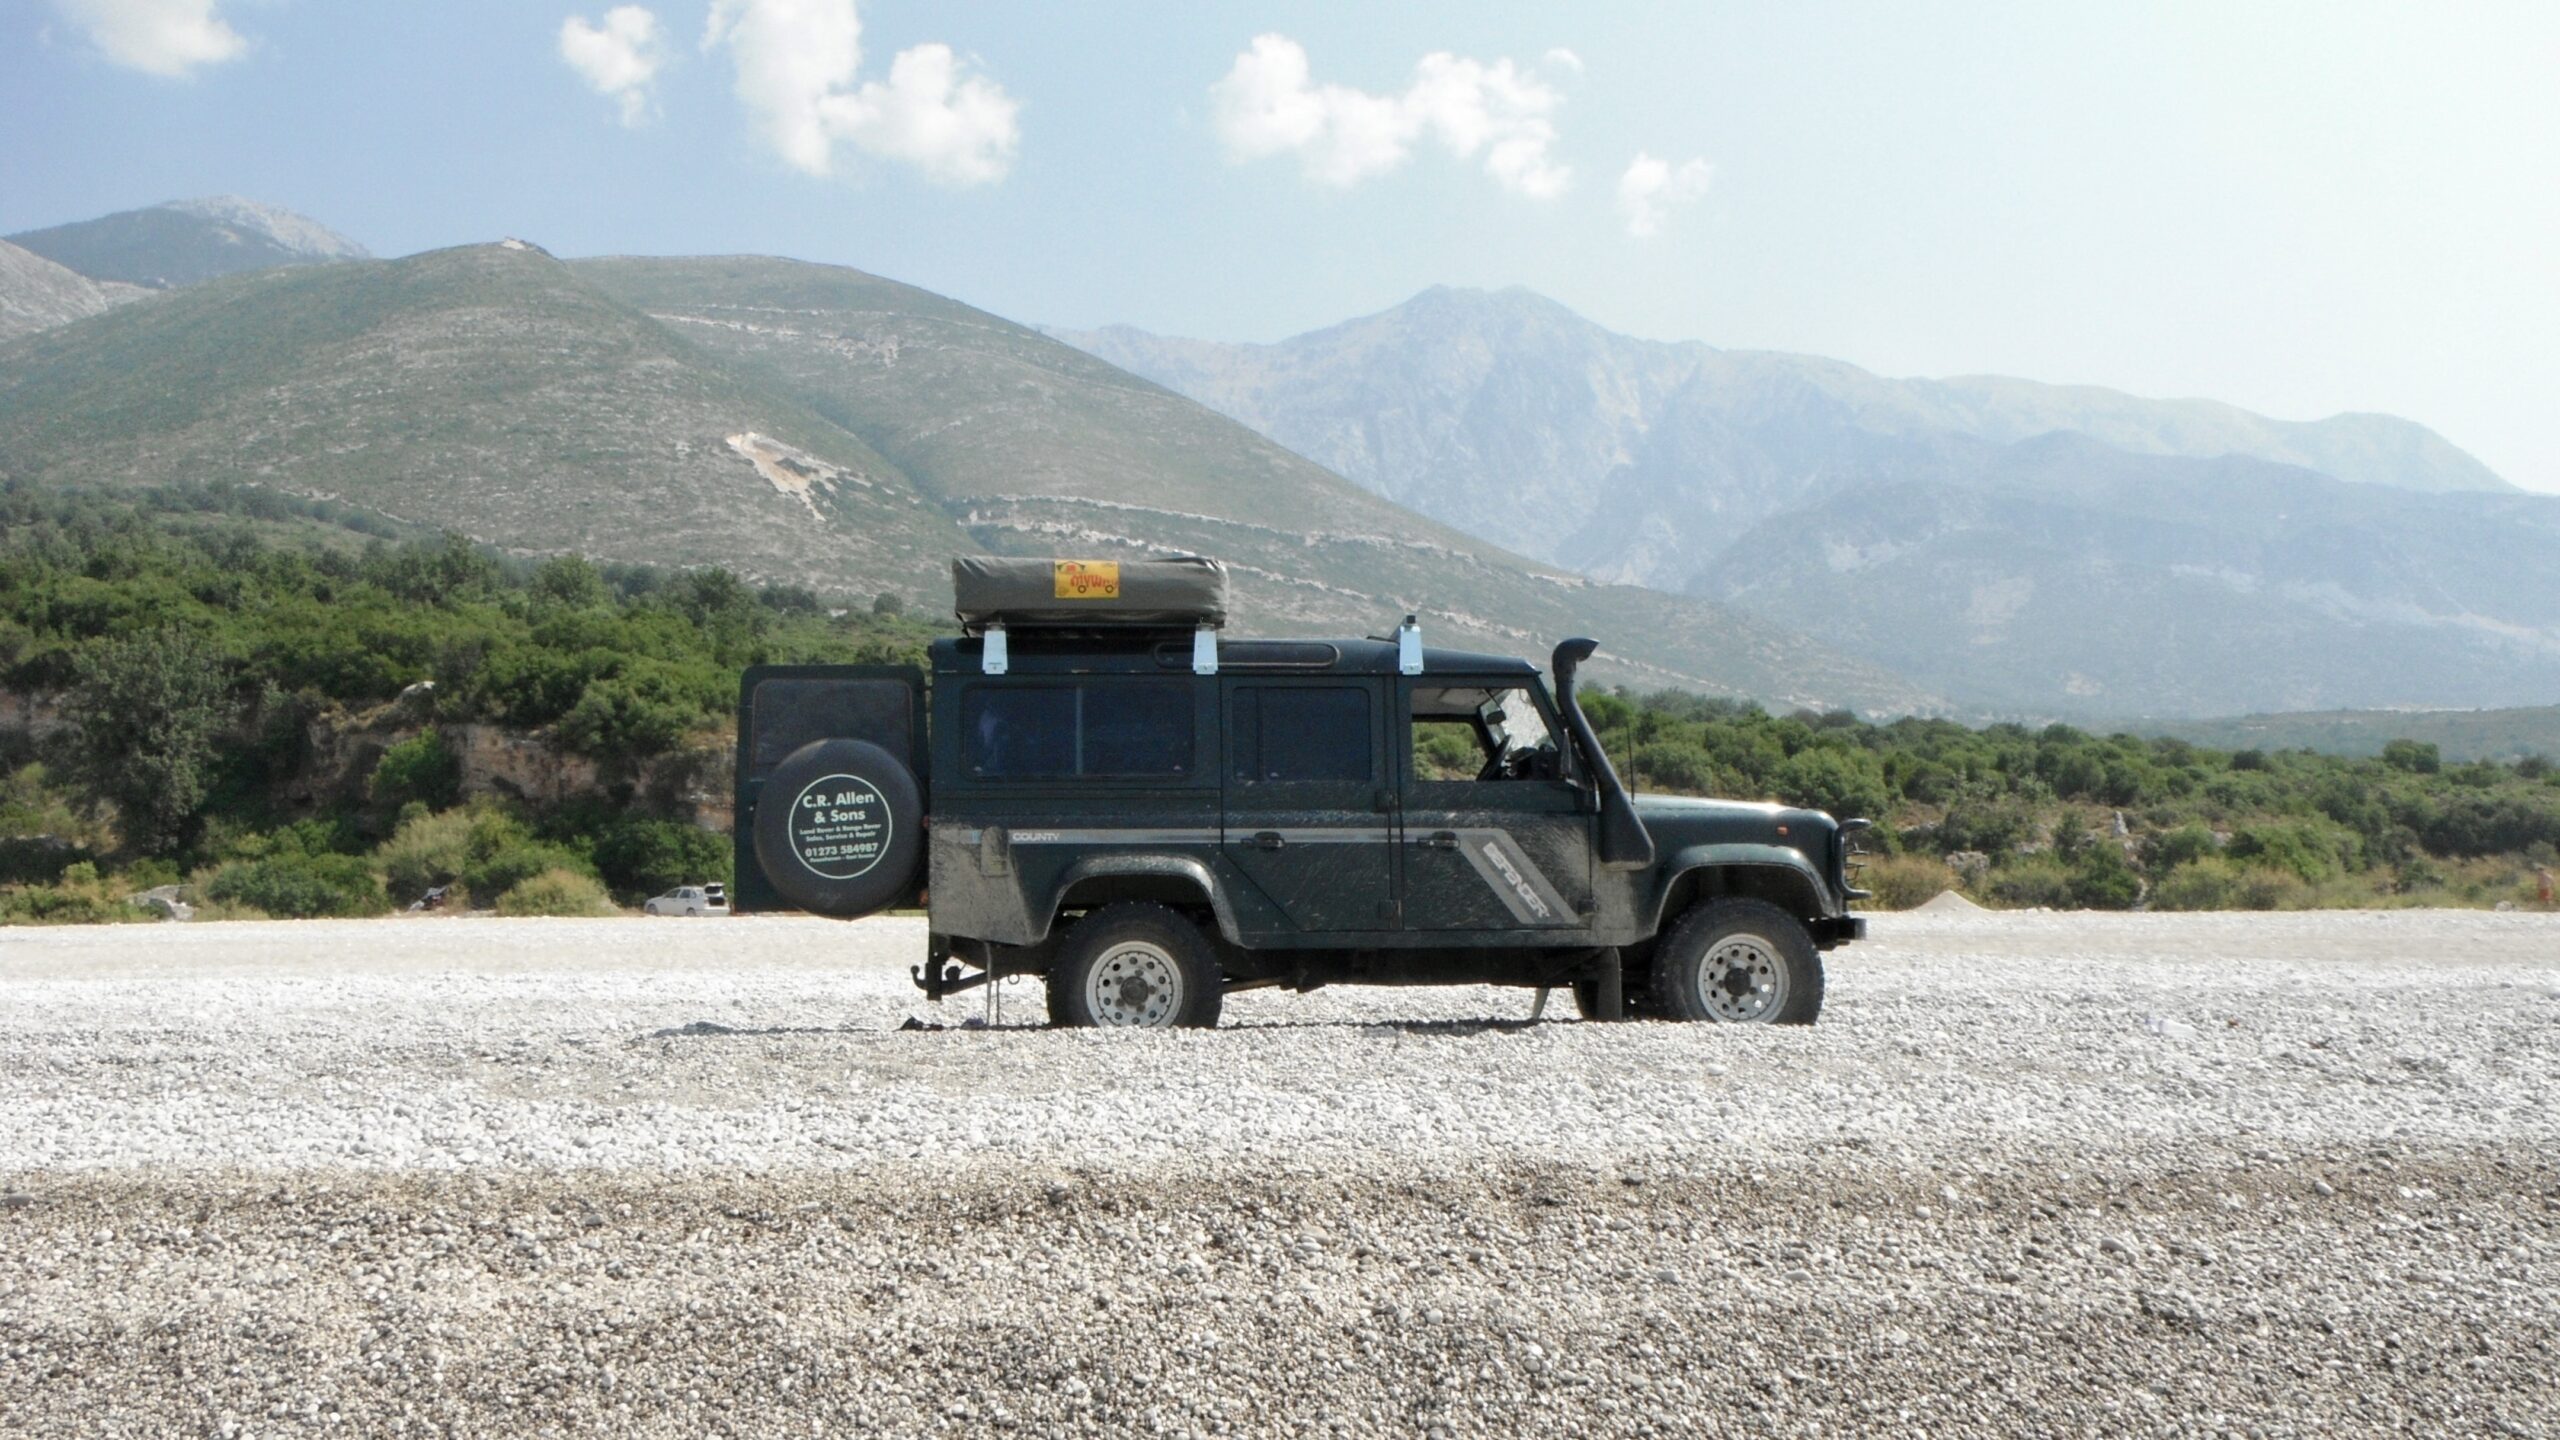 Land rover defender on the beach in albania